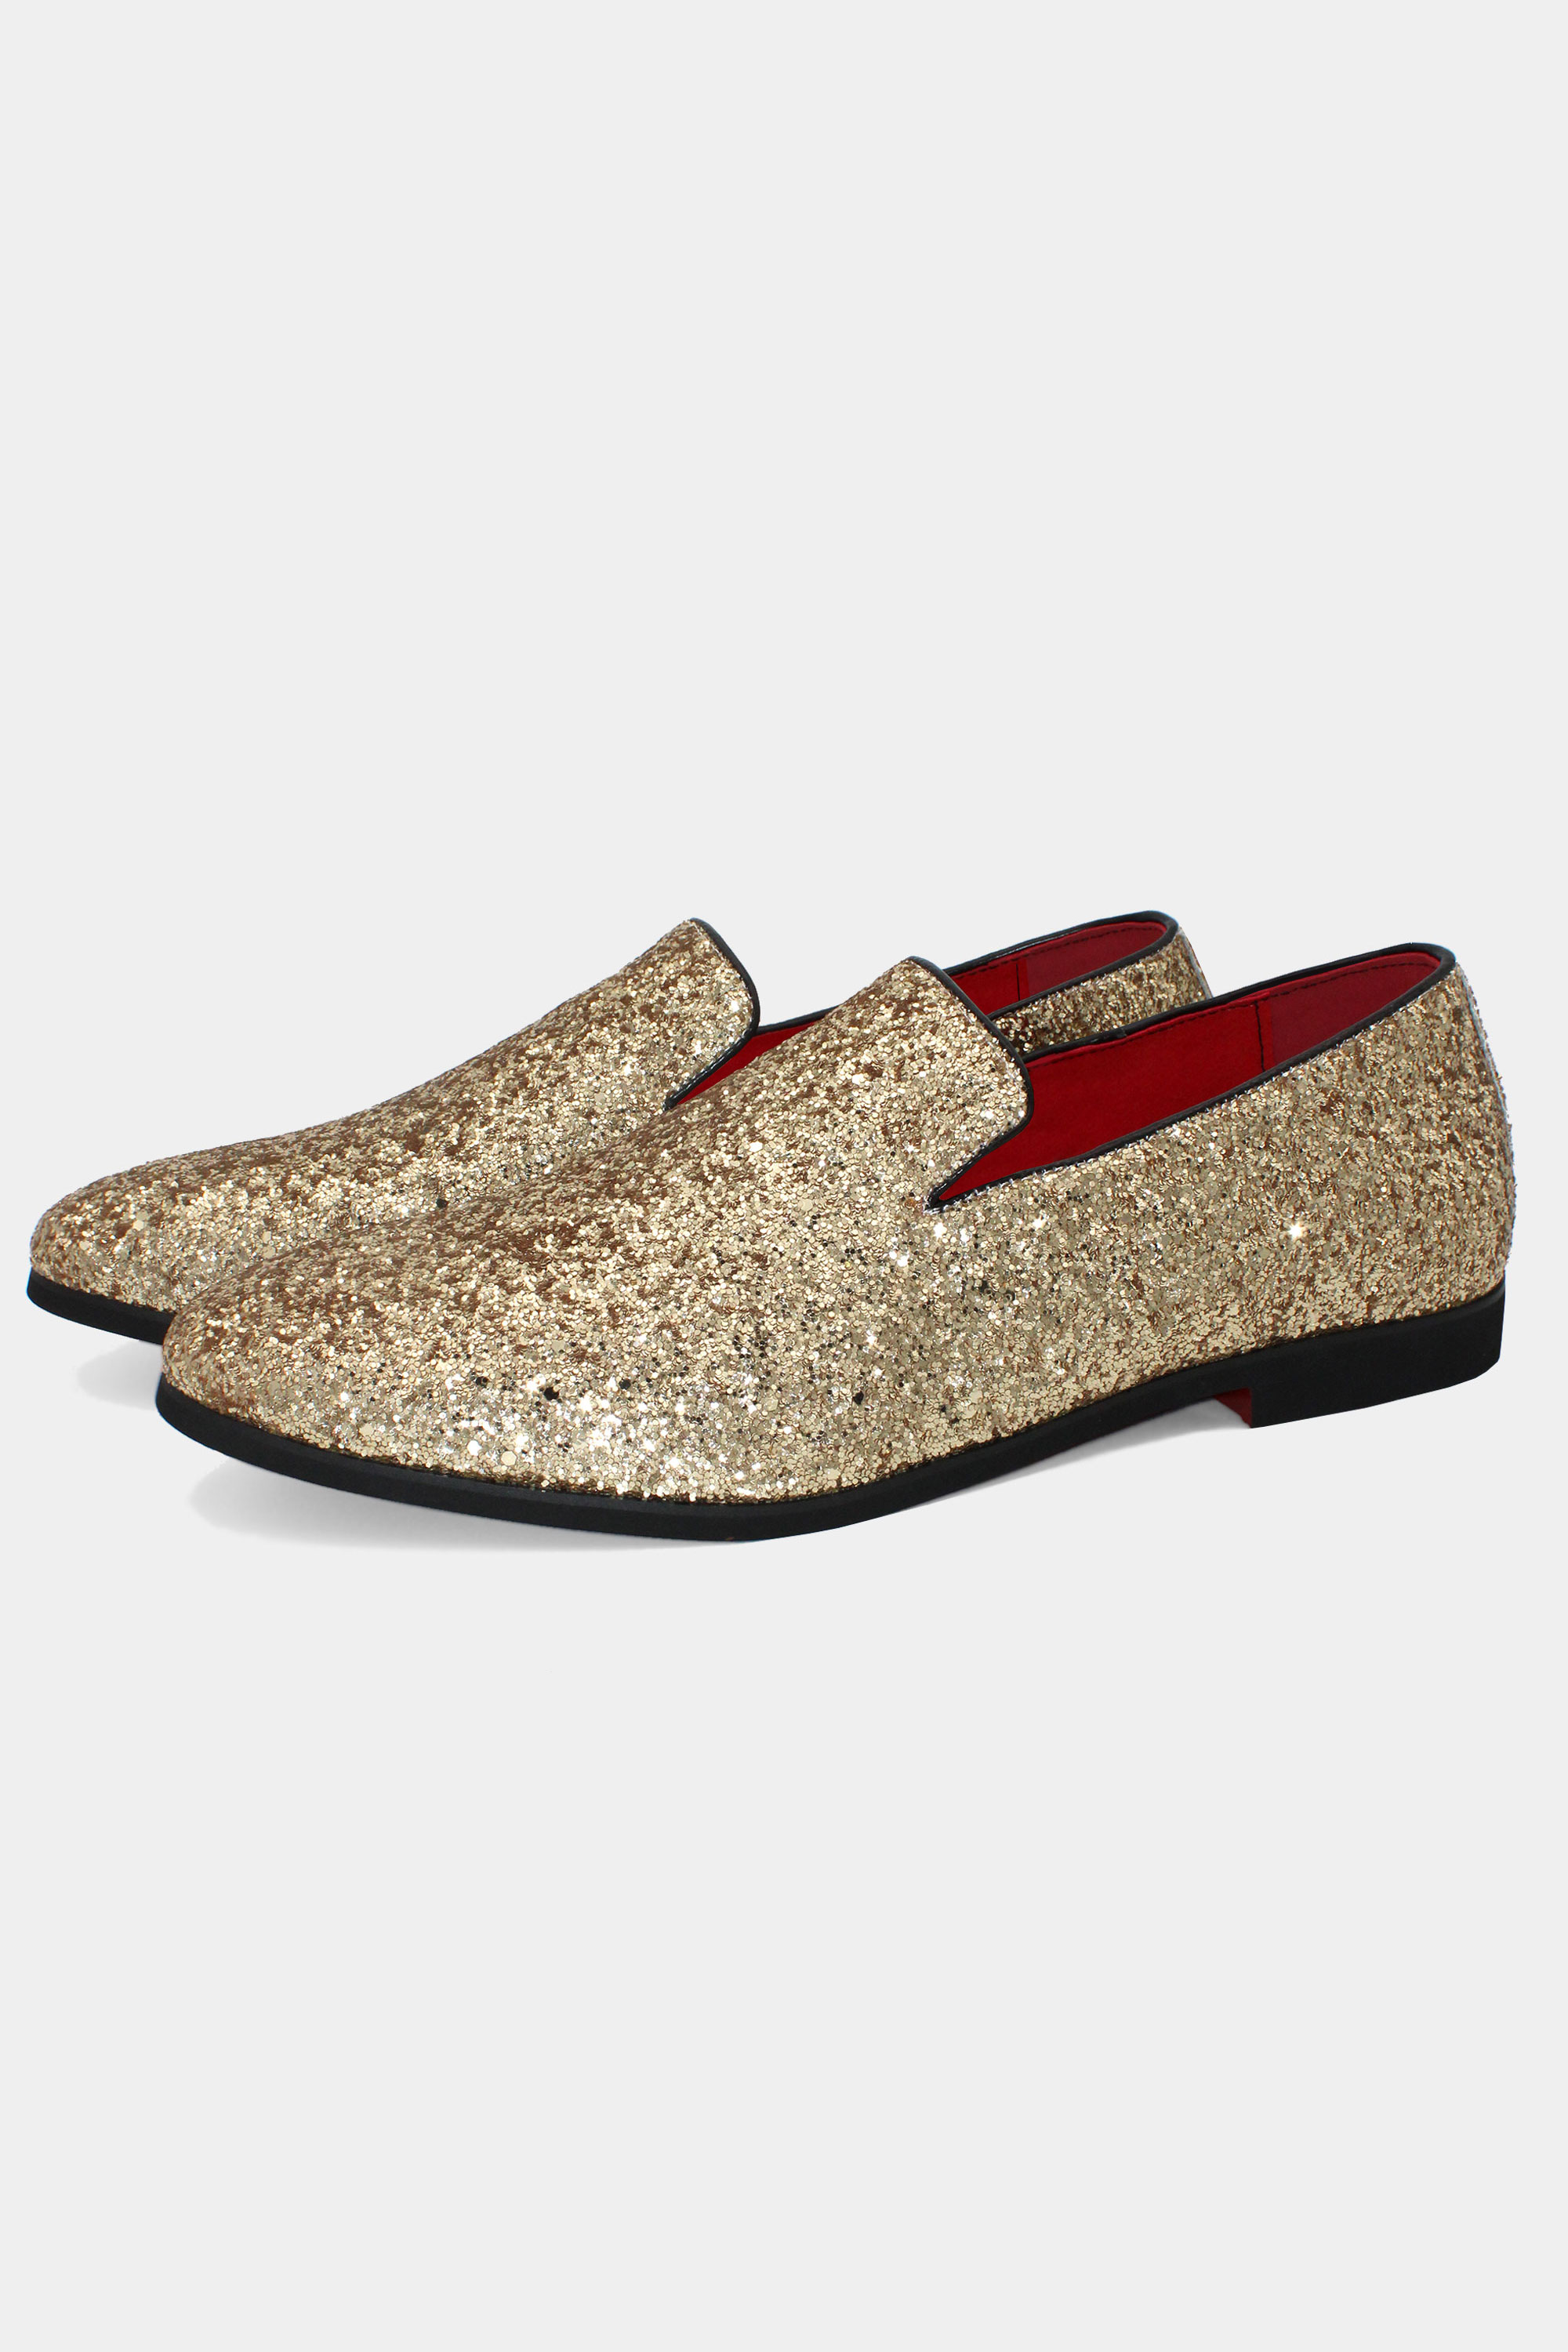 gold glitter shoes